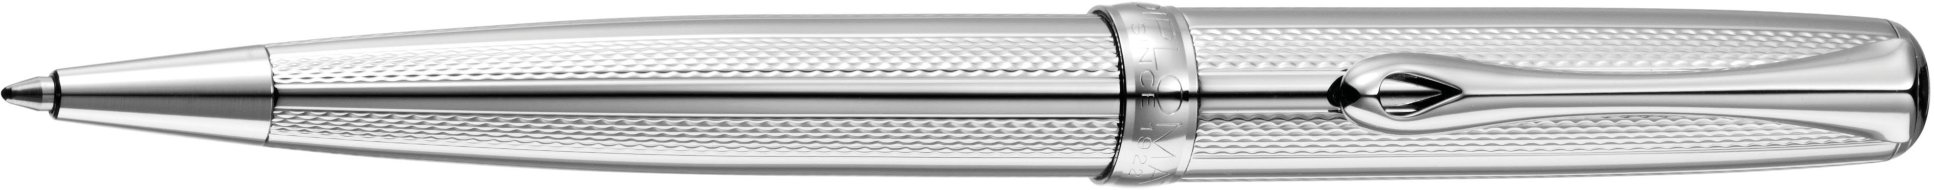 Шариковая ручка Diplomat Excellence A Guilloche Stripes Chrome